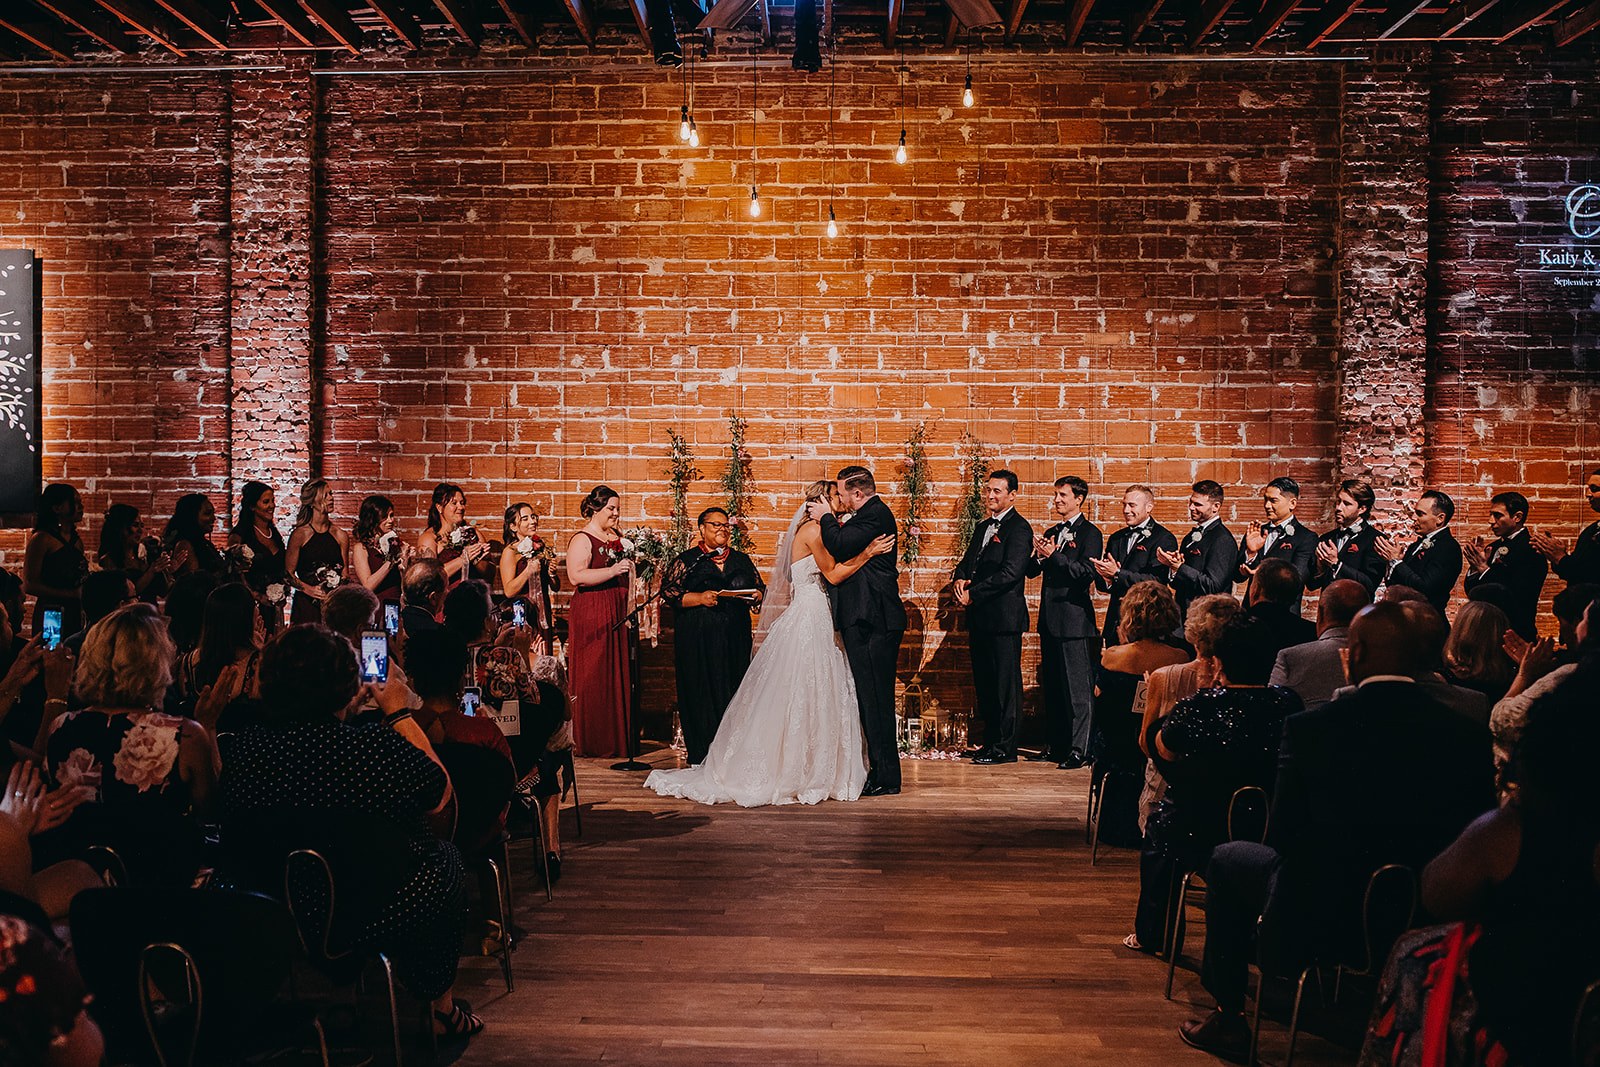 Urban Downtown St Pete Wedding with brick wall ceremony backdrop and string lights | Tampa Bay Unique Wedding VenueNOVA 535